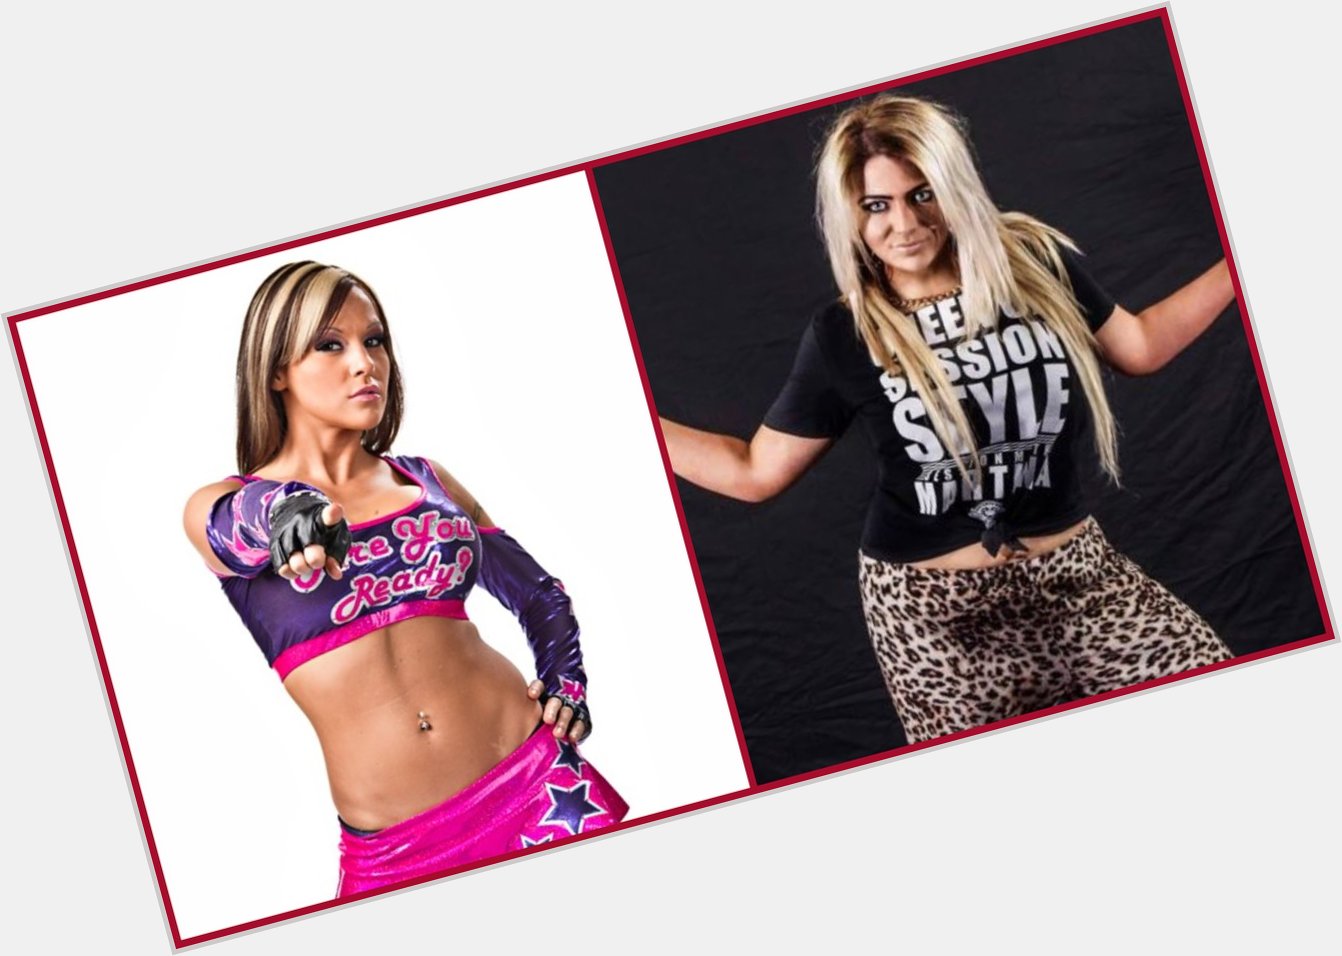 Next Up, The Session Moth defends her Blood Sport Women\s Title against Velvet Sky (Happy Birthday) 